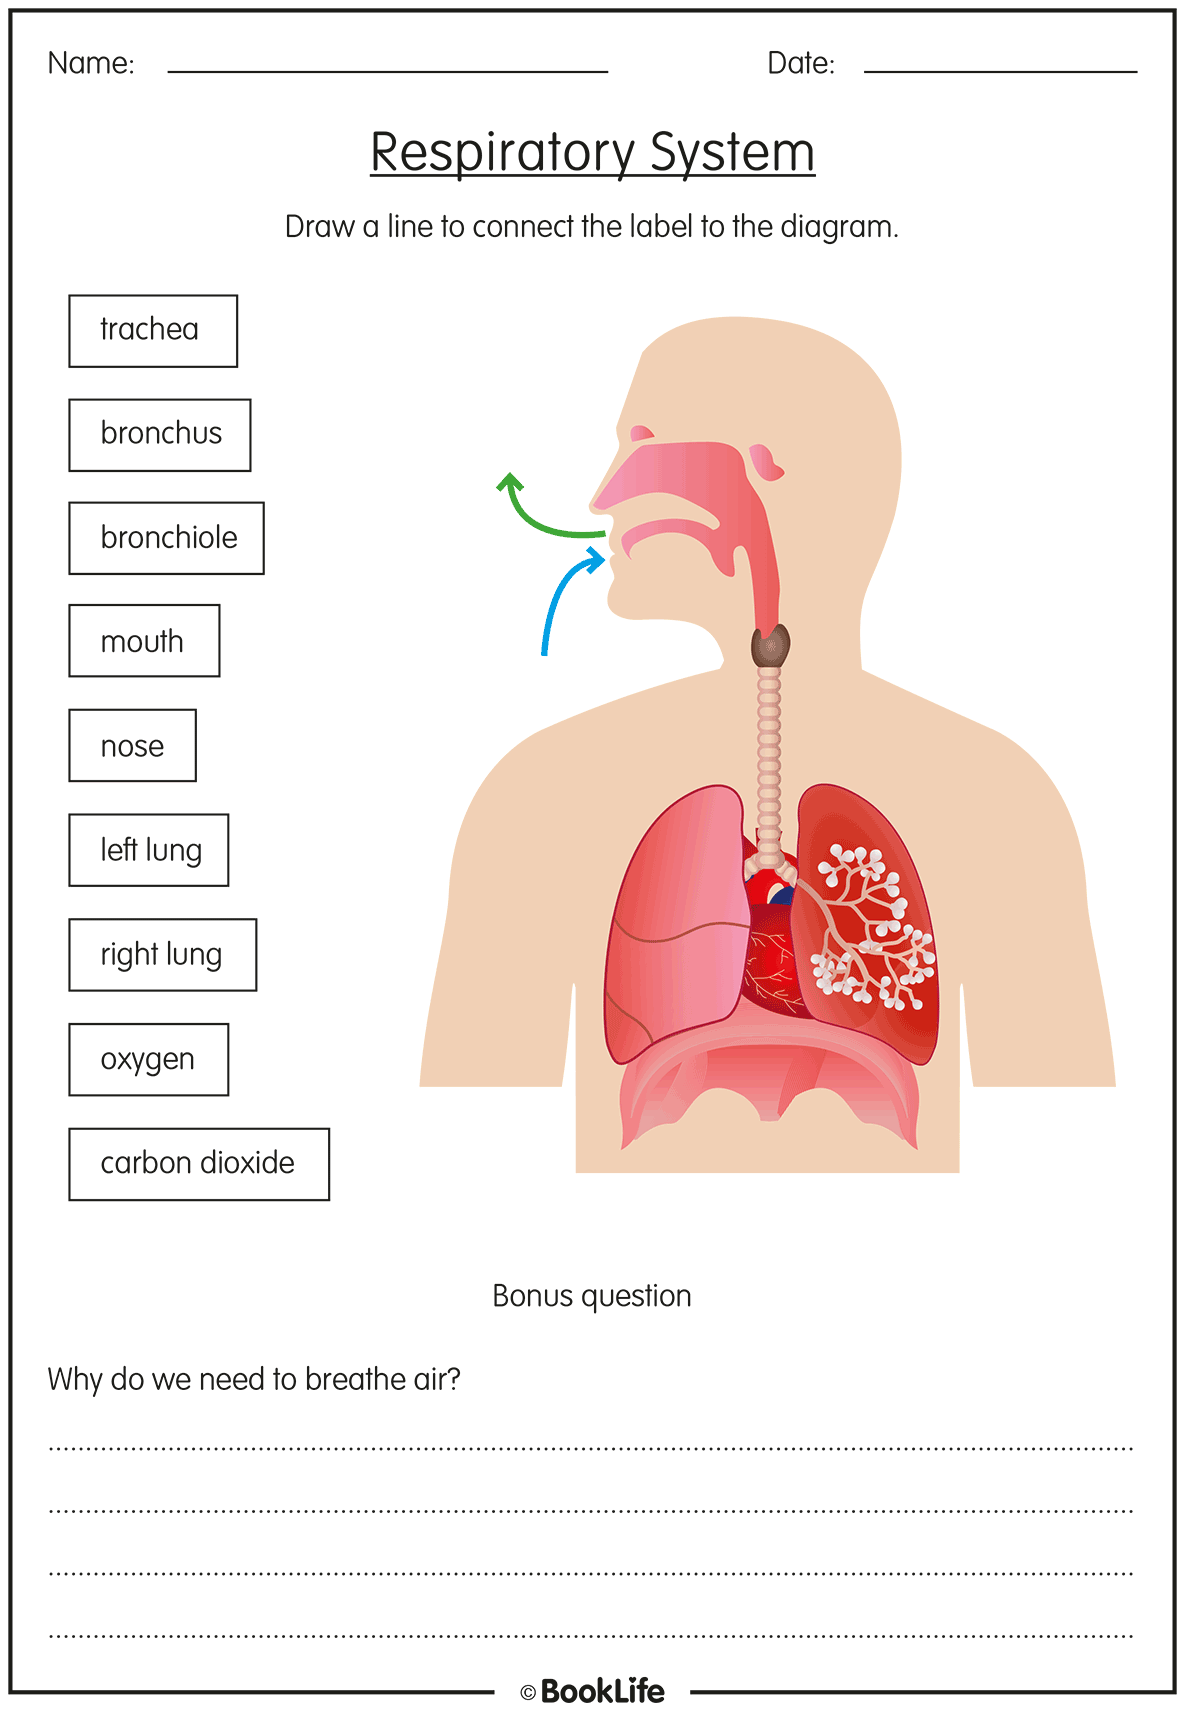 The Respiratory System by BookLife